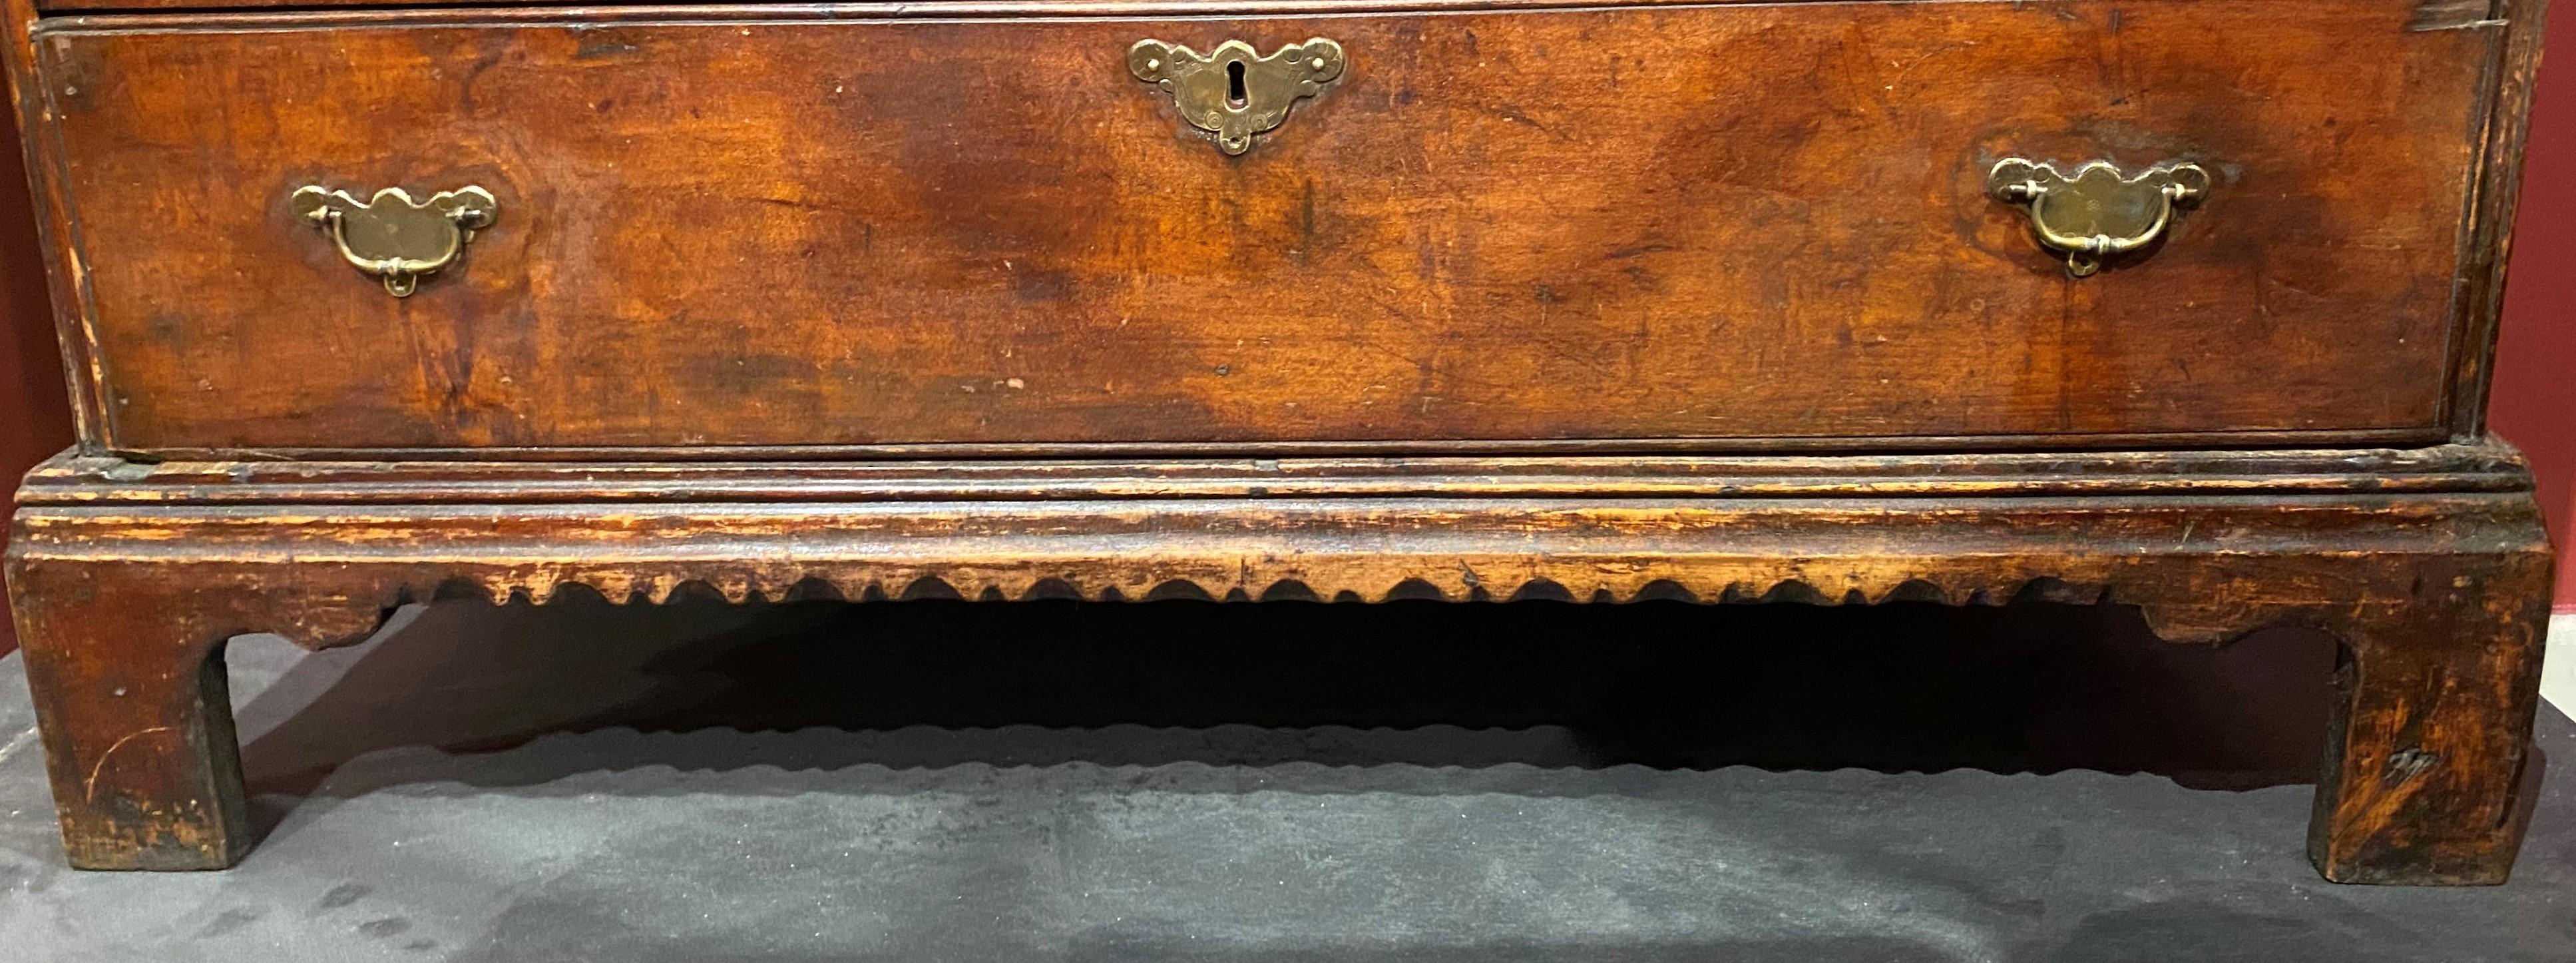 18th Century and Earlier Rare 18th Century NH Maple Fall Front Desk with Nicely Scalloped Apron